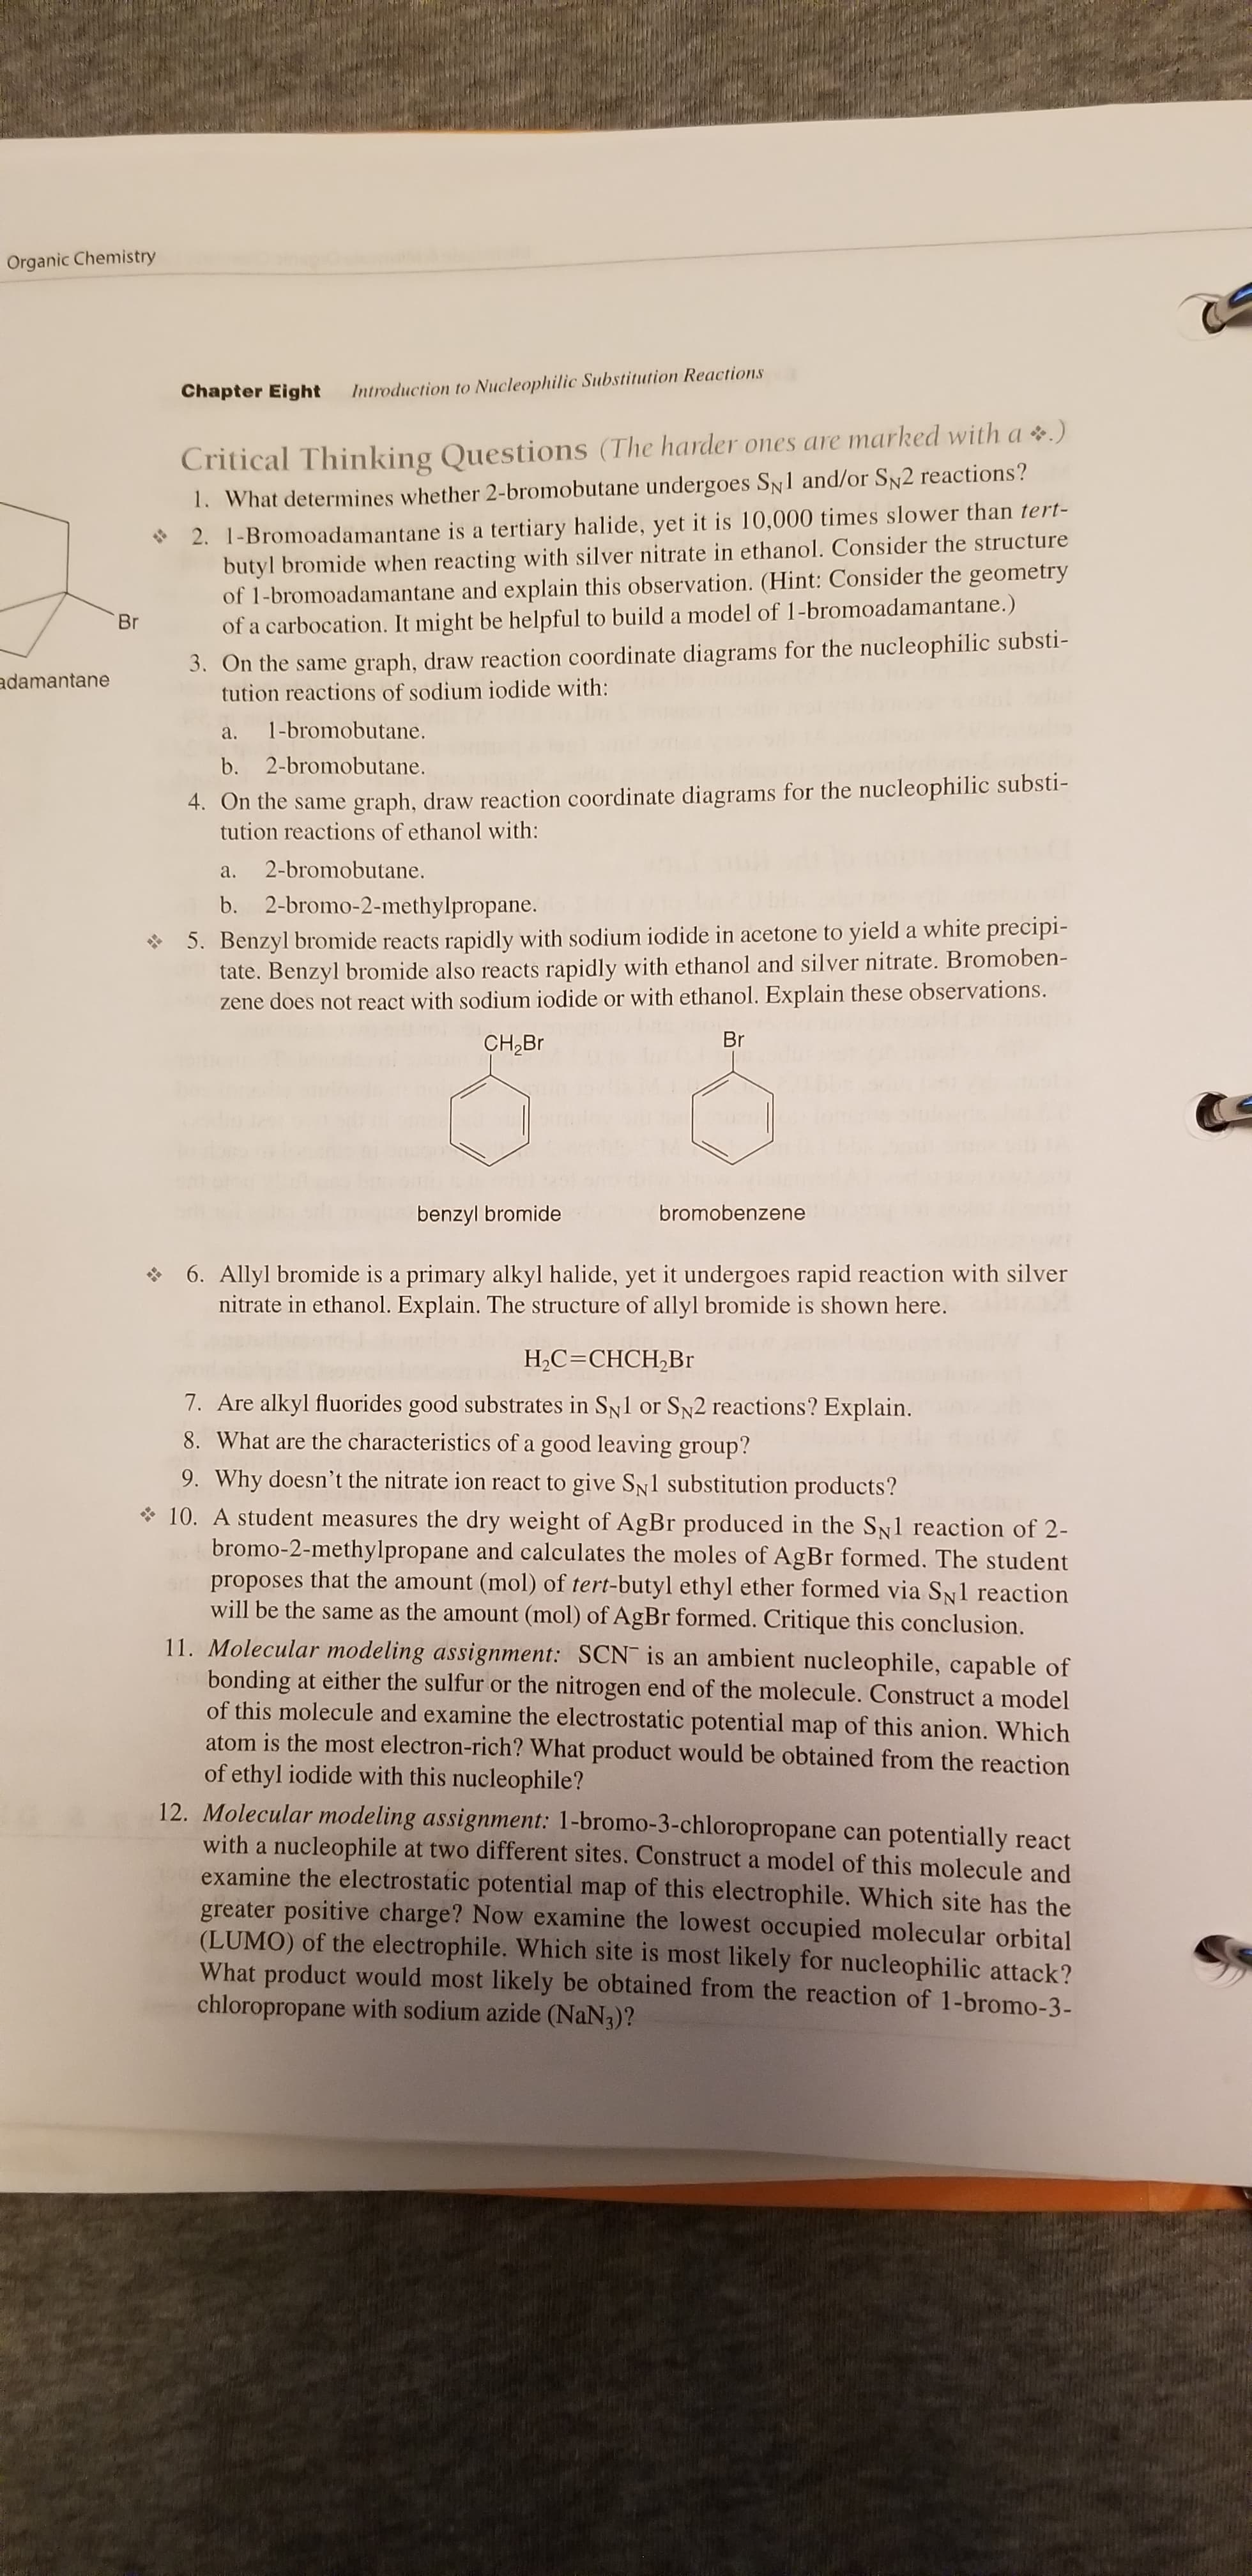 Organic Chemistry
Chapter Eight
Introduction to Nucleophilic Substitution Reactions
Critical Thinking Questions (The harder ones are marked with a .)
1. What determines whether 2-bromobutane undergoes SN1 and/or SN2 reactions?
* 2. 1-Bromoadamantane is a tertiary halide, yet it is 10,000 times slower than tert-
butyl bromide when reacting with silver nitrate in ethanol. Consider the structure
of 1-bromoadamantane and explain this observation. (Hint: Consider the geometry
of a carbocation. It might be helpful to build a model of 1-bromoadamantane.)
3. On the same graph, draw reaction coordinate diagrams for the nucleophilic substi-
tution reactions of sodium iodide with:
Br
adamantane
1-bromobutane.
a.
b. 2-bromobutane.
4. On the same graph, draw reaction coordinate diagrams for the nucleophilic substi-
tution reactions of ethanol with:
2-bromobutane.
a.
b. 2-bromo-2-methylpropane.
5. Benzyl bromide reacts rapidly with sodium iodide in acetone to yield a white precipi-
tate. Benzyl bromide also reacts rapidly with ethanol and silver nitrate. Bromoben-
zene does not react with sodium iodide or with ethanol. Explain these observations.
Br
CH,Br
bromobenzene
benzyl bromide
* 6. Allyl bromide is a primary alkyl halide, yet it undergoes rapid reaction with silver
nitrate in ethanol. Explain. The structure of allyl bromide is shown here.
Н.С -СНСH,Br
7. Are alkyl fluorides good substrates in SN1 or SN2 reactions? Explain.
8. What are the characteristics of a good leaving group?
9. Why doesn't the nitrate ion react to give SN1 substitution products?
* 10. A student measures the dry weight of AgBr produced in the SN1 reaction of 2-
bromo-2-methylpropane and calculates the moles of AgBr formed. The student
proposes that the amount (mol) of tert-butyl ethyl ether formed via Sy1 reaction
will be the same as the amount (mol) of AgBr formed. Critique this conclusion.
11. Molecular modeling assignment: SCN is an ambient nucleophile, capable of
bonding at either the sulfur or the nitrogen end of the molecule. Construct a model
of this molecule and examine the electrostatic potential map of this anion. Which
atom is the most electron-rich? What product would be obtained from the reaction
of ethyl iodide with this nucleophile?
12. Molecular modeling assignment: 1-bromo-3-chloropropane can potentially react
with a nucleophile at two different sites. Construct a model of this molecule and
examine the electrostatic potential map of this electrophile. Which site has the
greater positive charge? Now examine the lowest occupied molecular orbital
(LUMO) of the electrophile. Which site is most likely for nucleophilic attack?
What product would most likely be obtained from the reaction of 1-bromo-3-
chloropropane with sodium azide (NaN3)?
